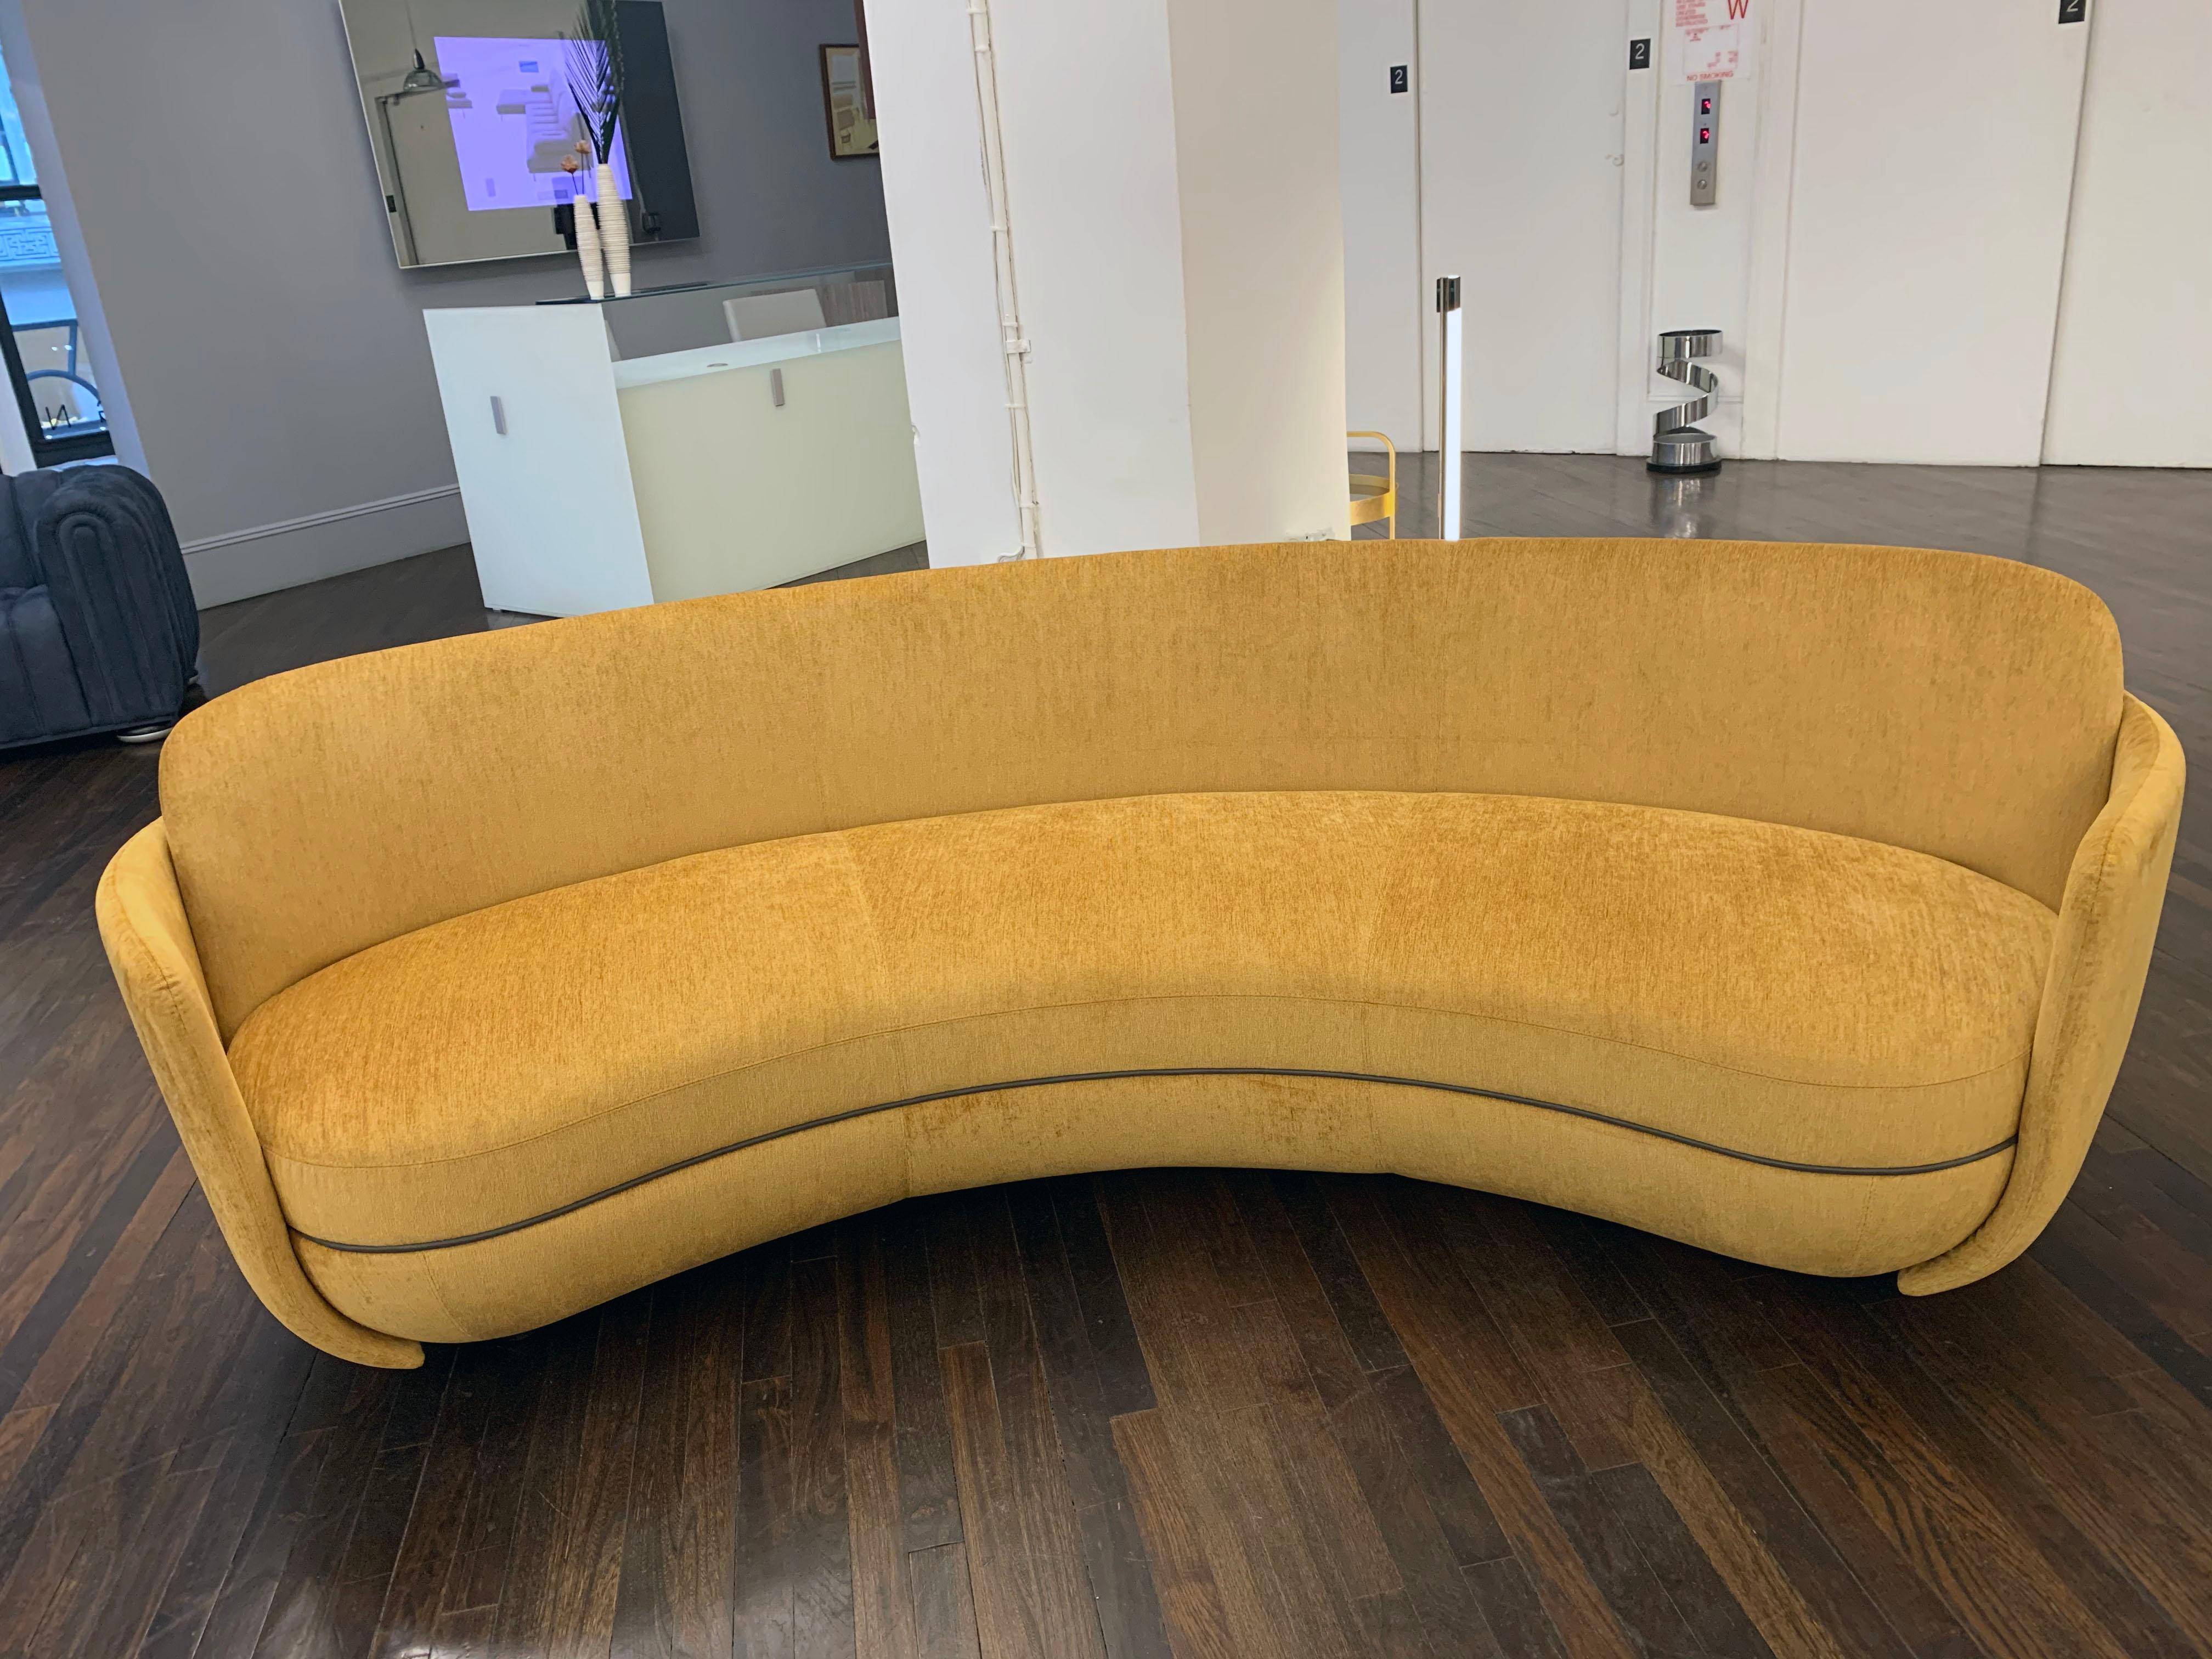 Cate Sevilla gold / Trim Nappa flint
Soft, round, inviting, protective. Long gone are the days when formal sofa arrangements dominated living spaces. New and different - Miles ahead, in a manner of speaking.
Measure: 236cm (92.9